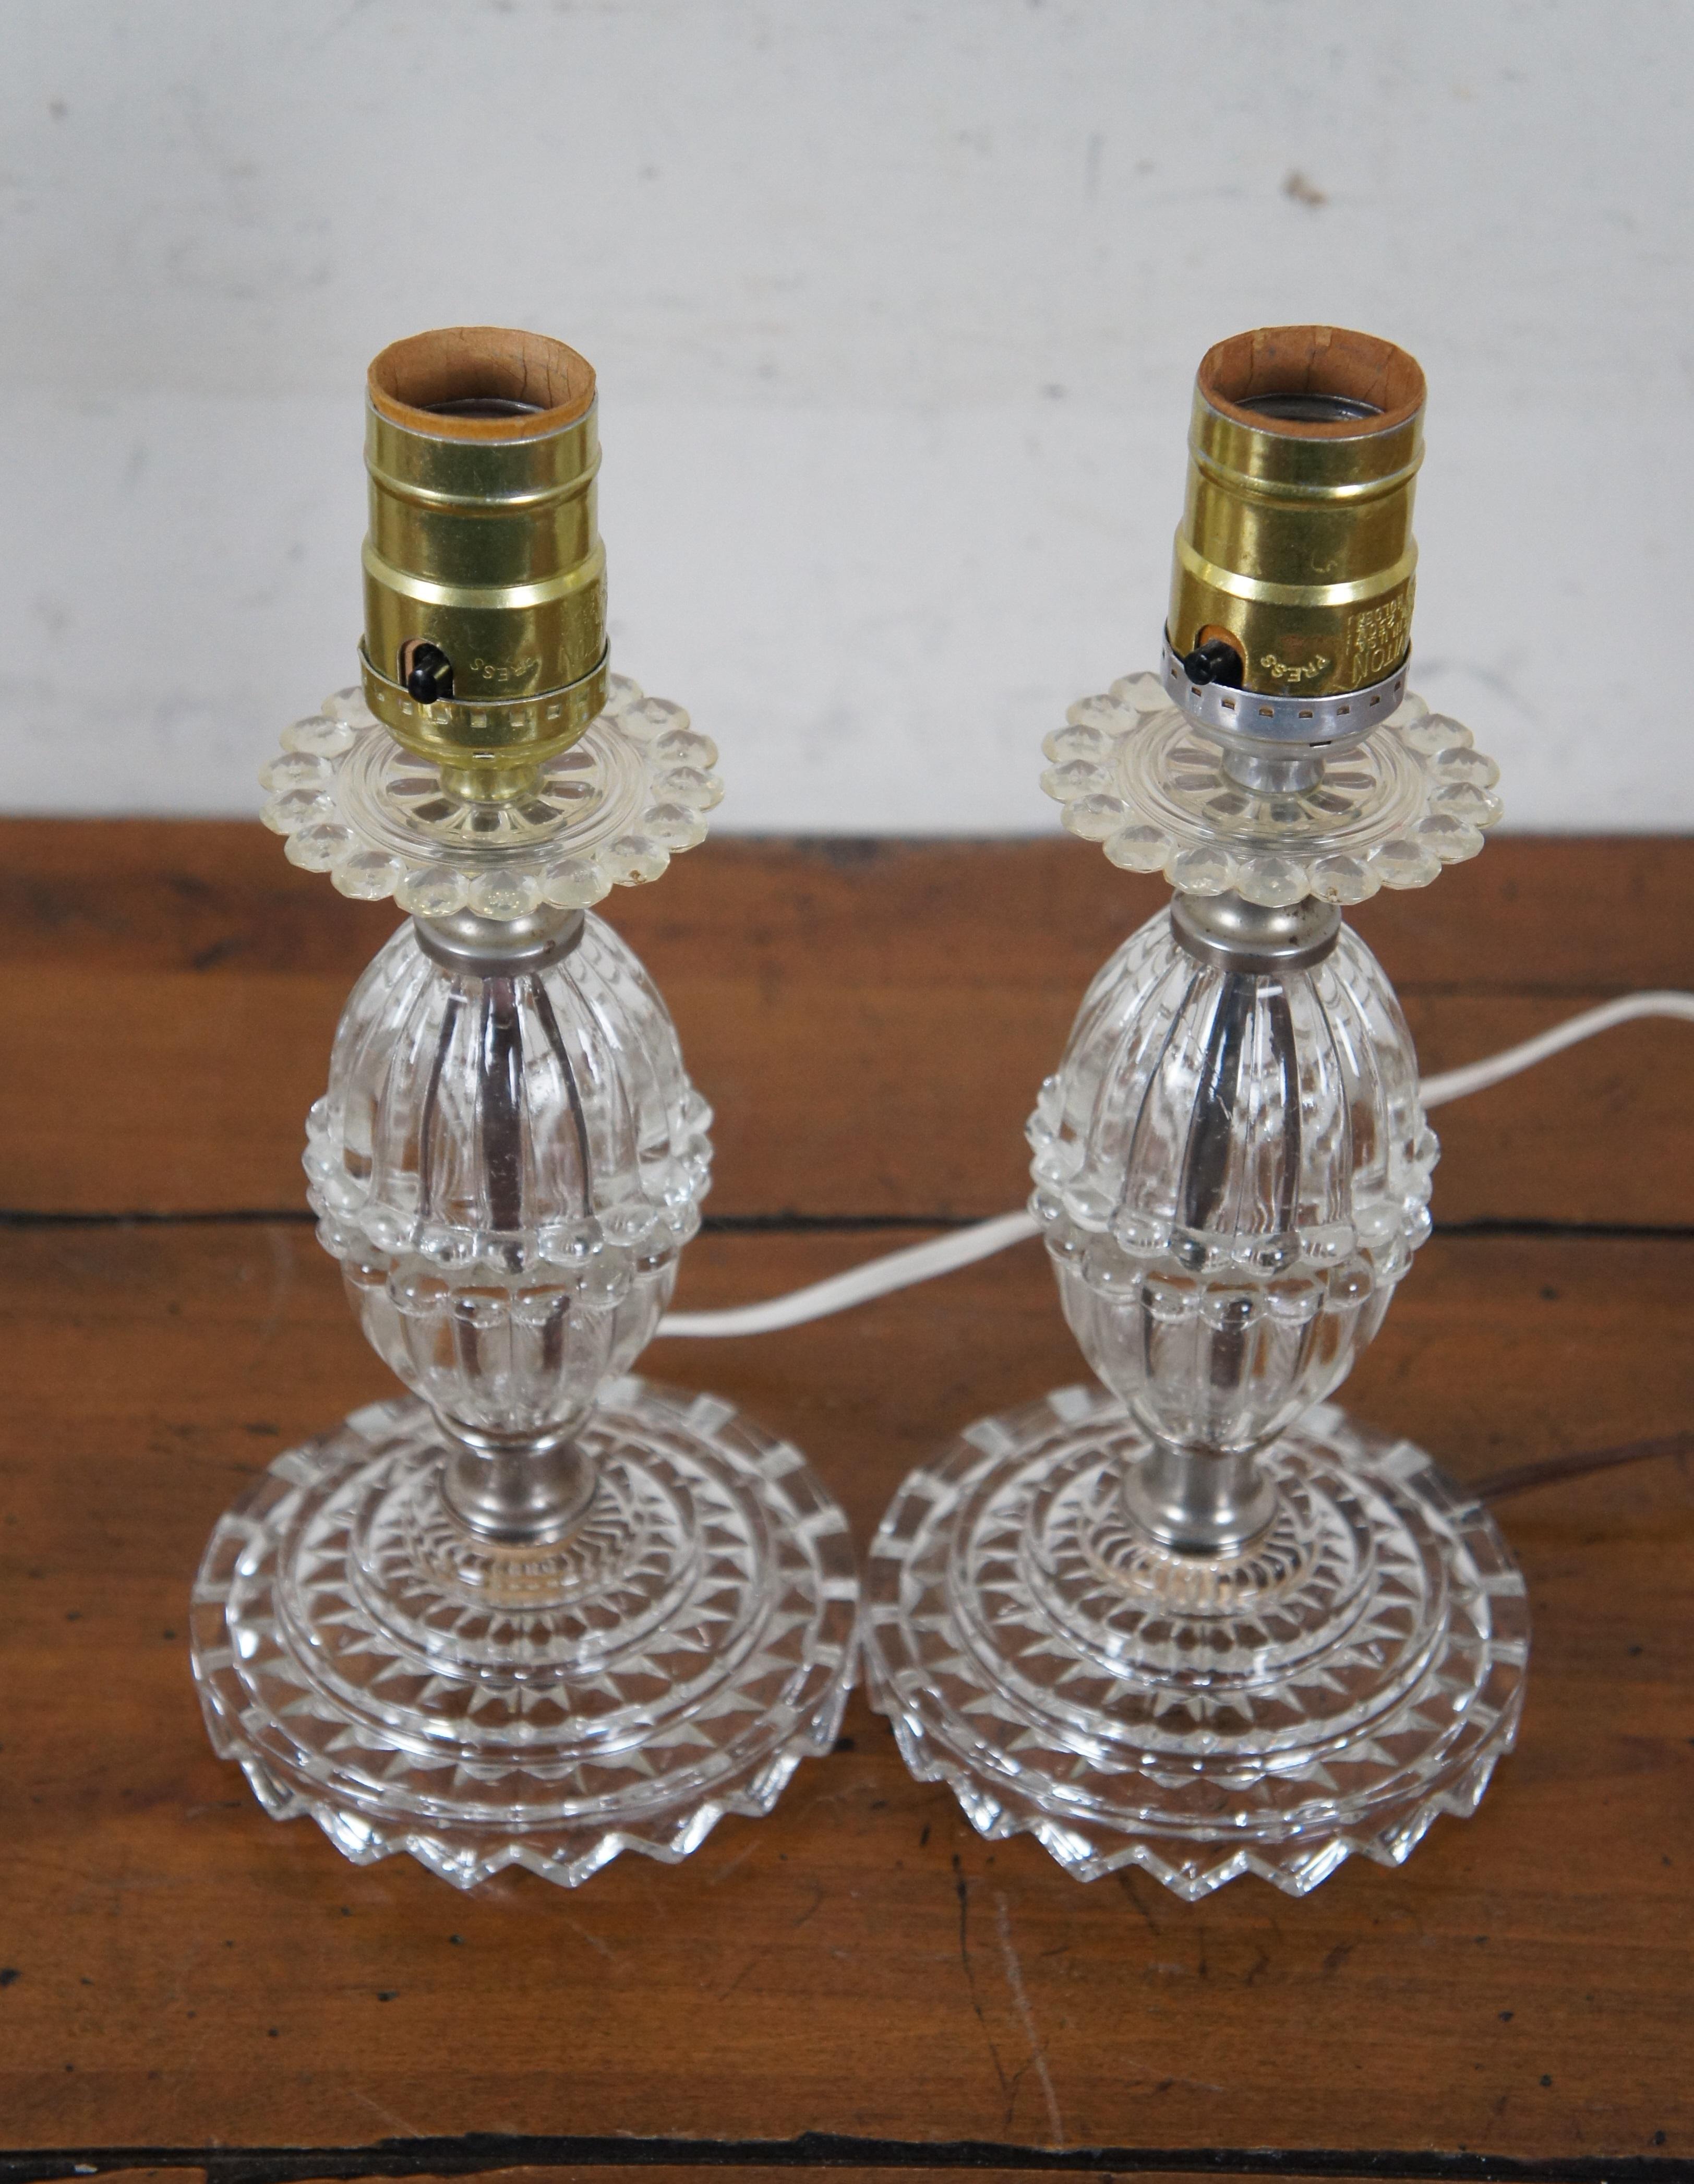 2 Midcentury Pressed Glass Vanity Bedside Budoir Table Lamps MCM In Good Condition For Sale In Dayton, OH